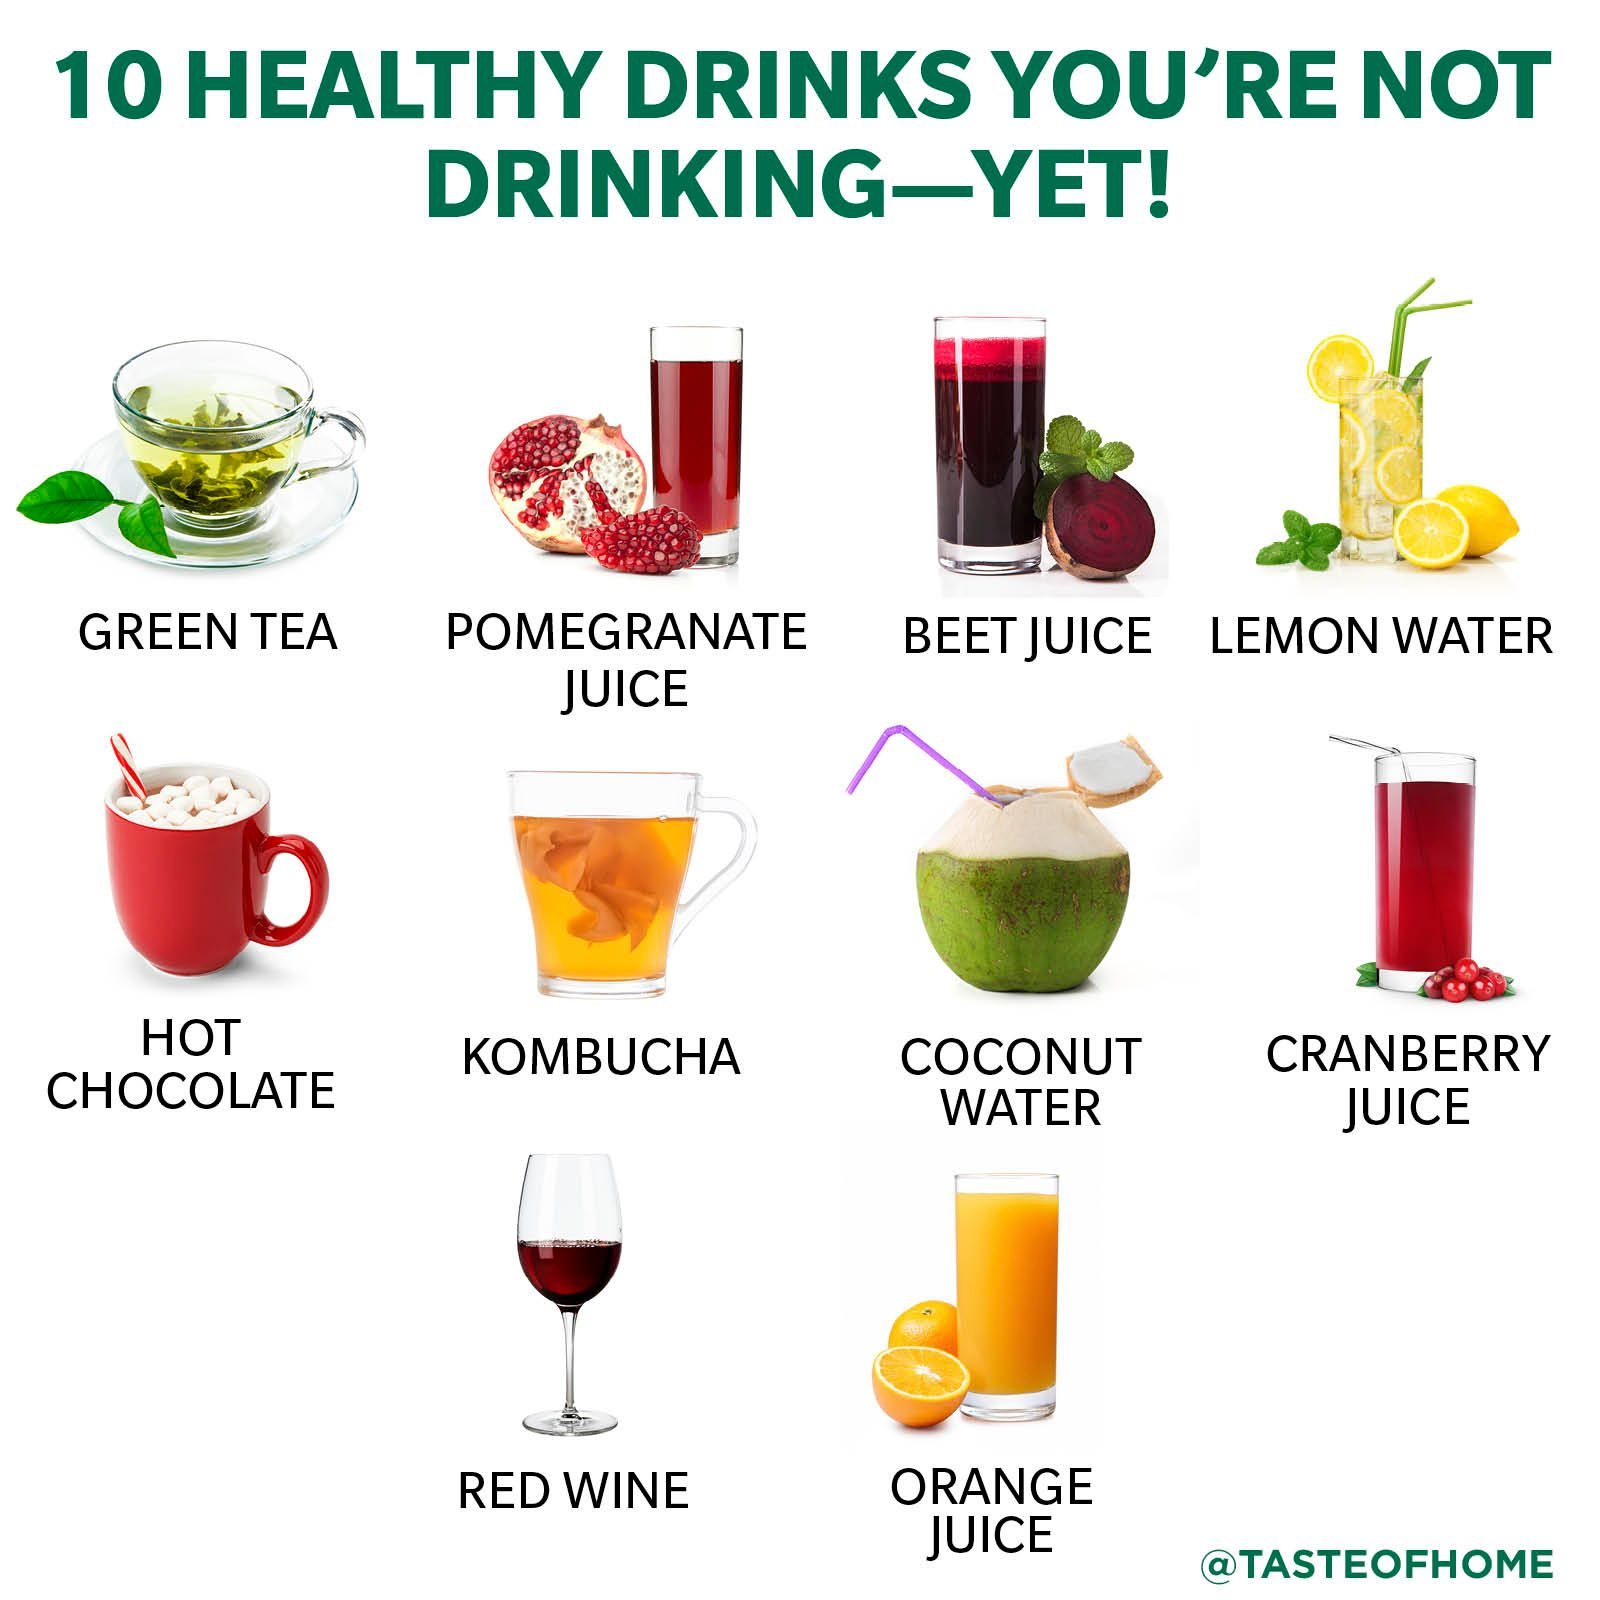 https://www.tasteofhome.com/wp-content/uploads/2020/06/10-Healthy-Drinks-You%E2%80%99re-Not-Drinking%E2%80%94Yet-.jpg?fit=696%2C696